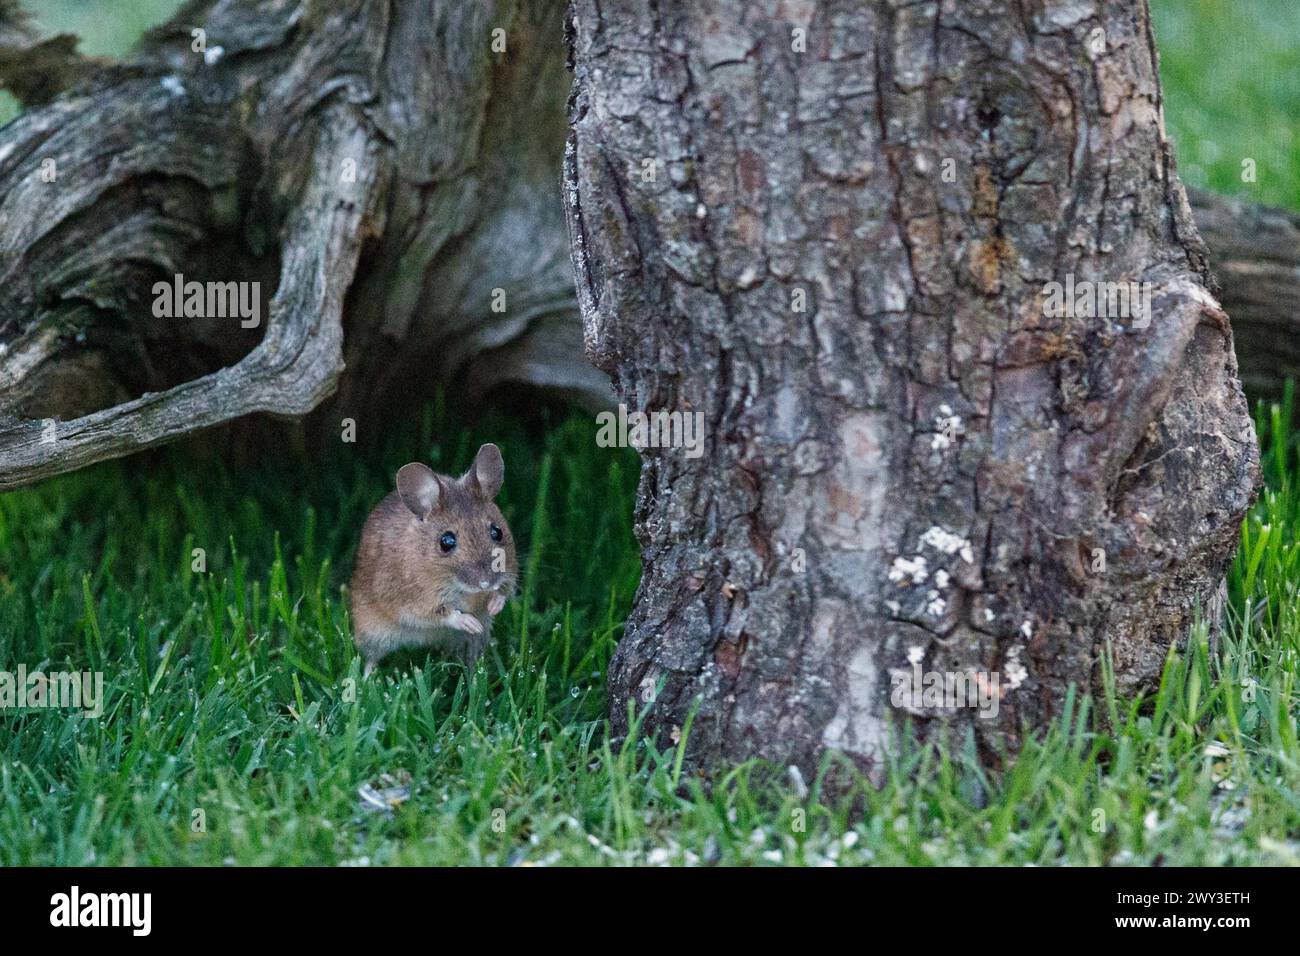 Wood mouse standing in green grass looking down next to tree root Stock Photo